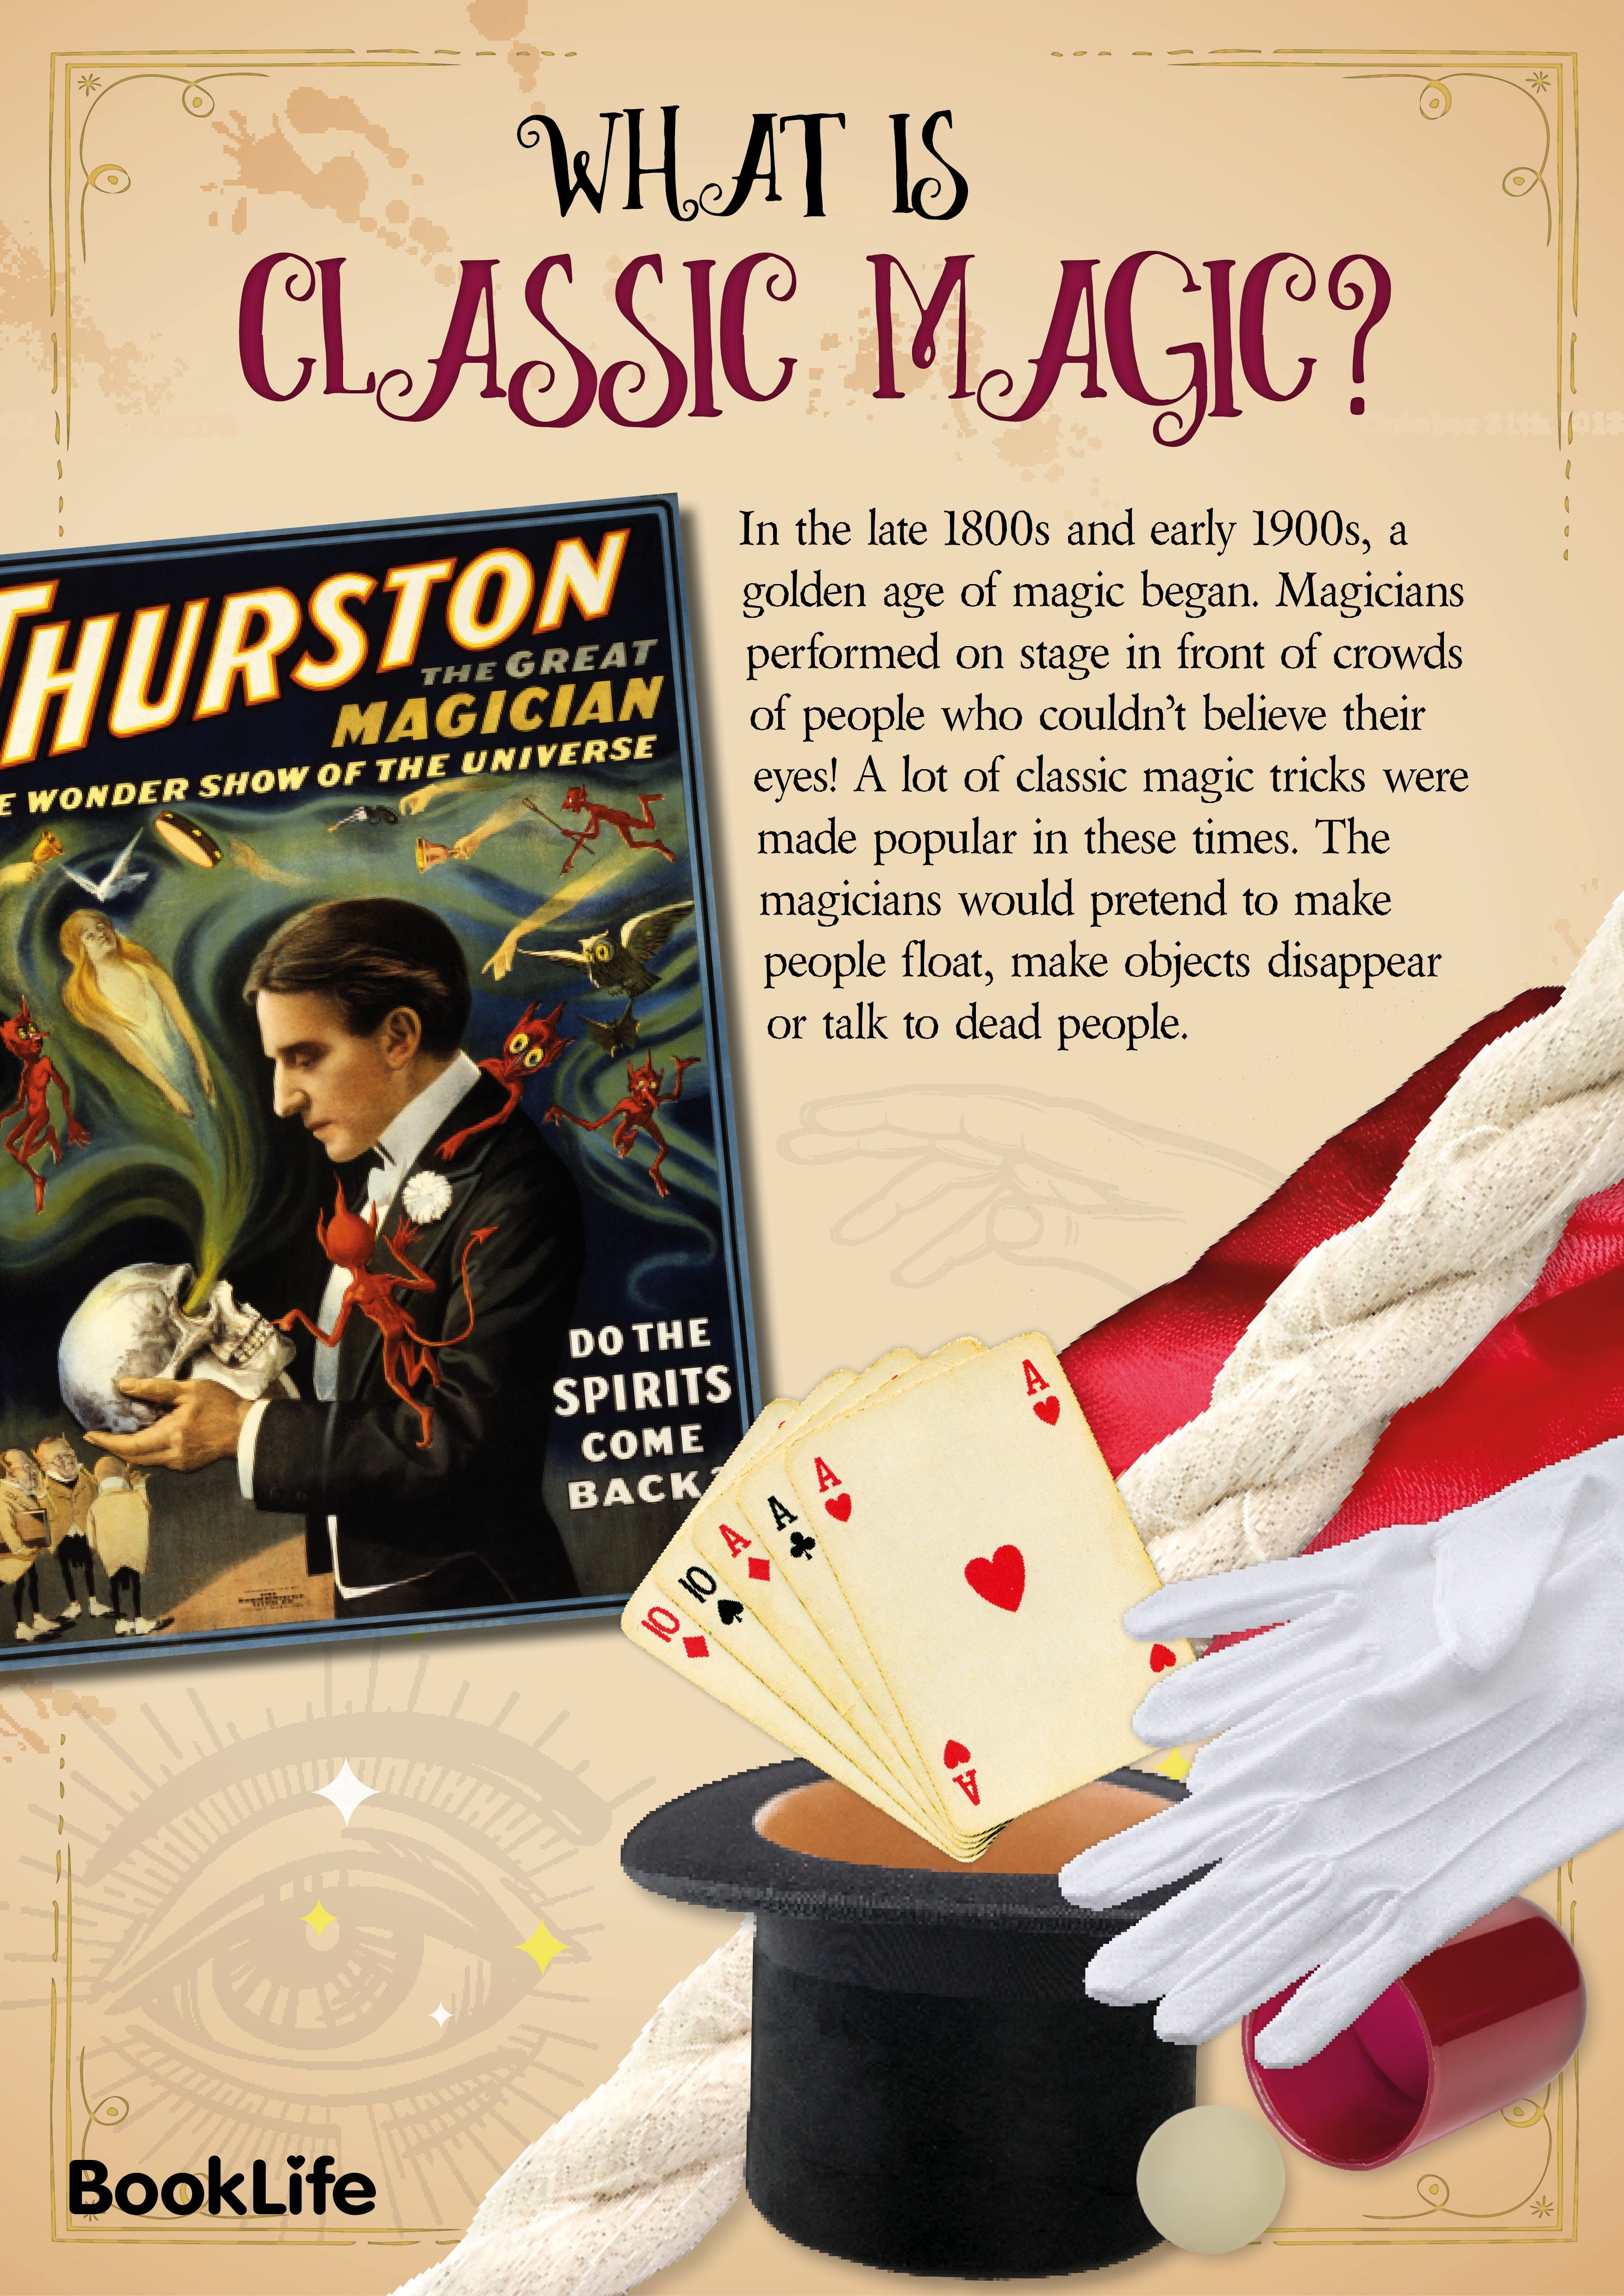 Free Classic Magic Poster by BookLife